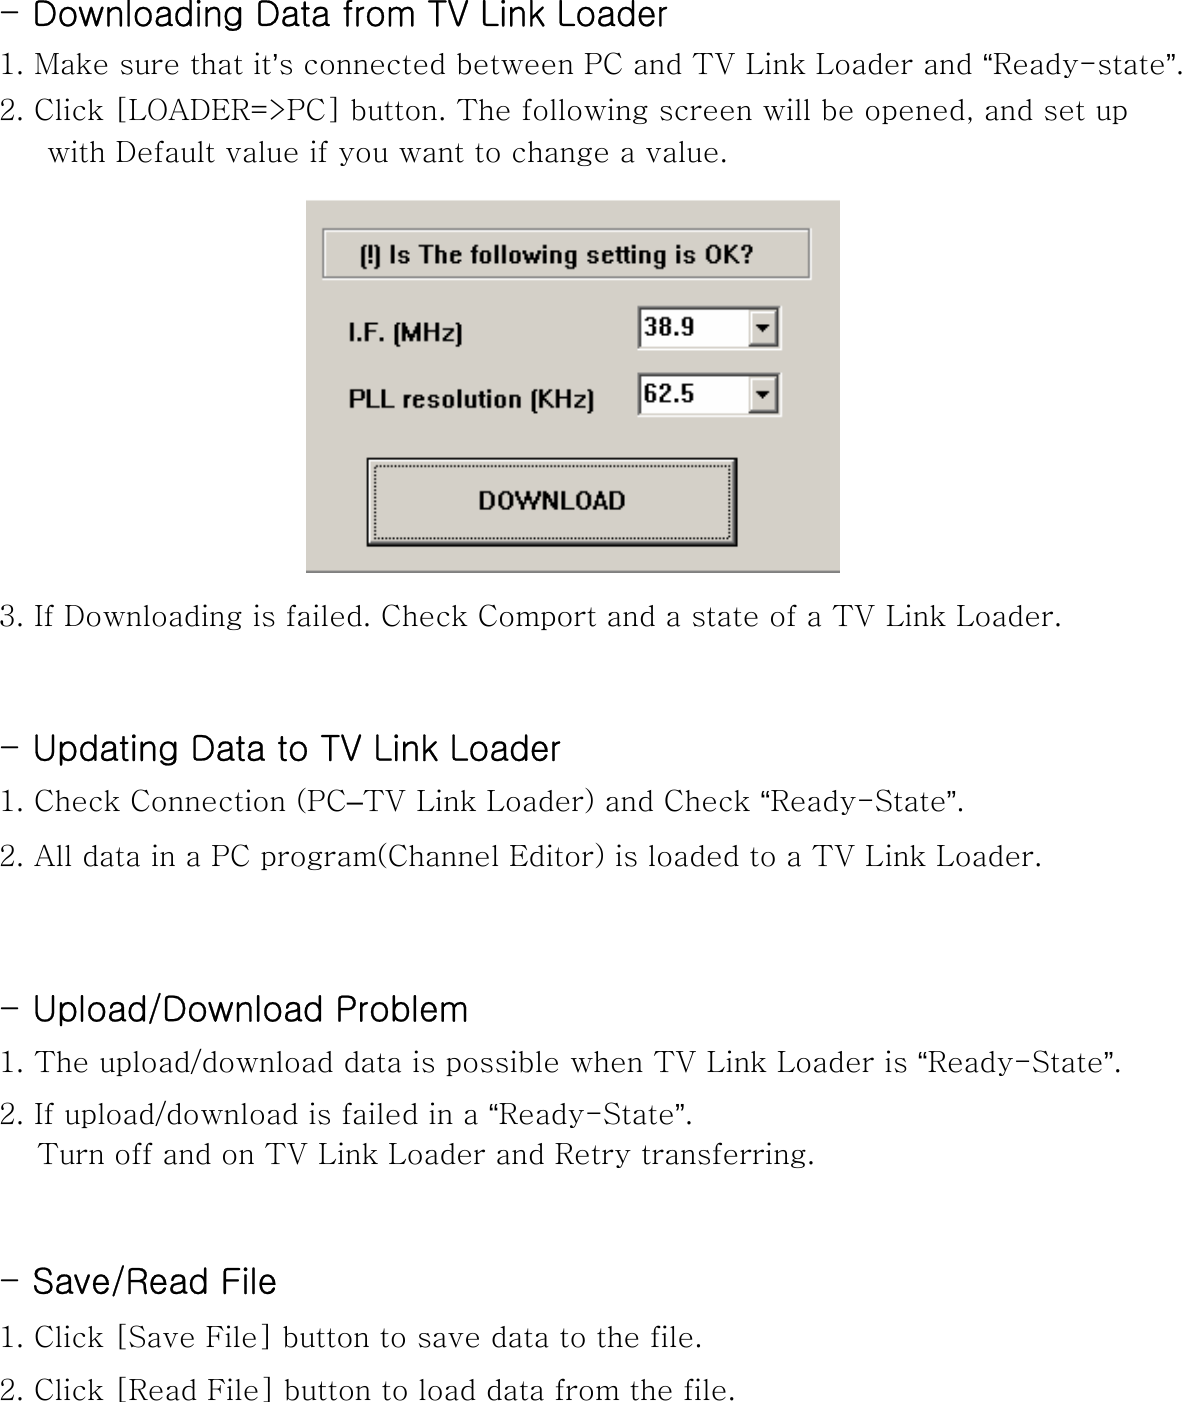 -Downloading Data from TV Link Loader1. Make sure that it’s connected between PC and TV Link Loader and “Ready-state”.2. Click [LOADER=&gt;PC] button. The following screen will be opened, and set up with Default value if you want to change a value.3. If Downloading is failed. Check Comport and a state of a TV Link Loader.-Updating Data to TV Link Loader1. Check Connection (PC–TV Link Loader) and Check “Ready-State”.2. All data in a PC program(Channel Editor) is loaded to a TV Link Loader.-Upload/Download Problem 1. The upload/download data is possible when TV Link Loader is “Ready-State”.2. If upload/download is failed in a “Ready-State”. Turn off and on TV Link Loader and Retry transferring. -Save/Read File 1. Click [Save File] button to save data to the file.2. Click [Read File] button to load data from the file. 